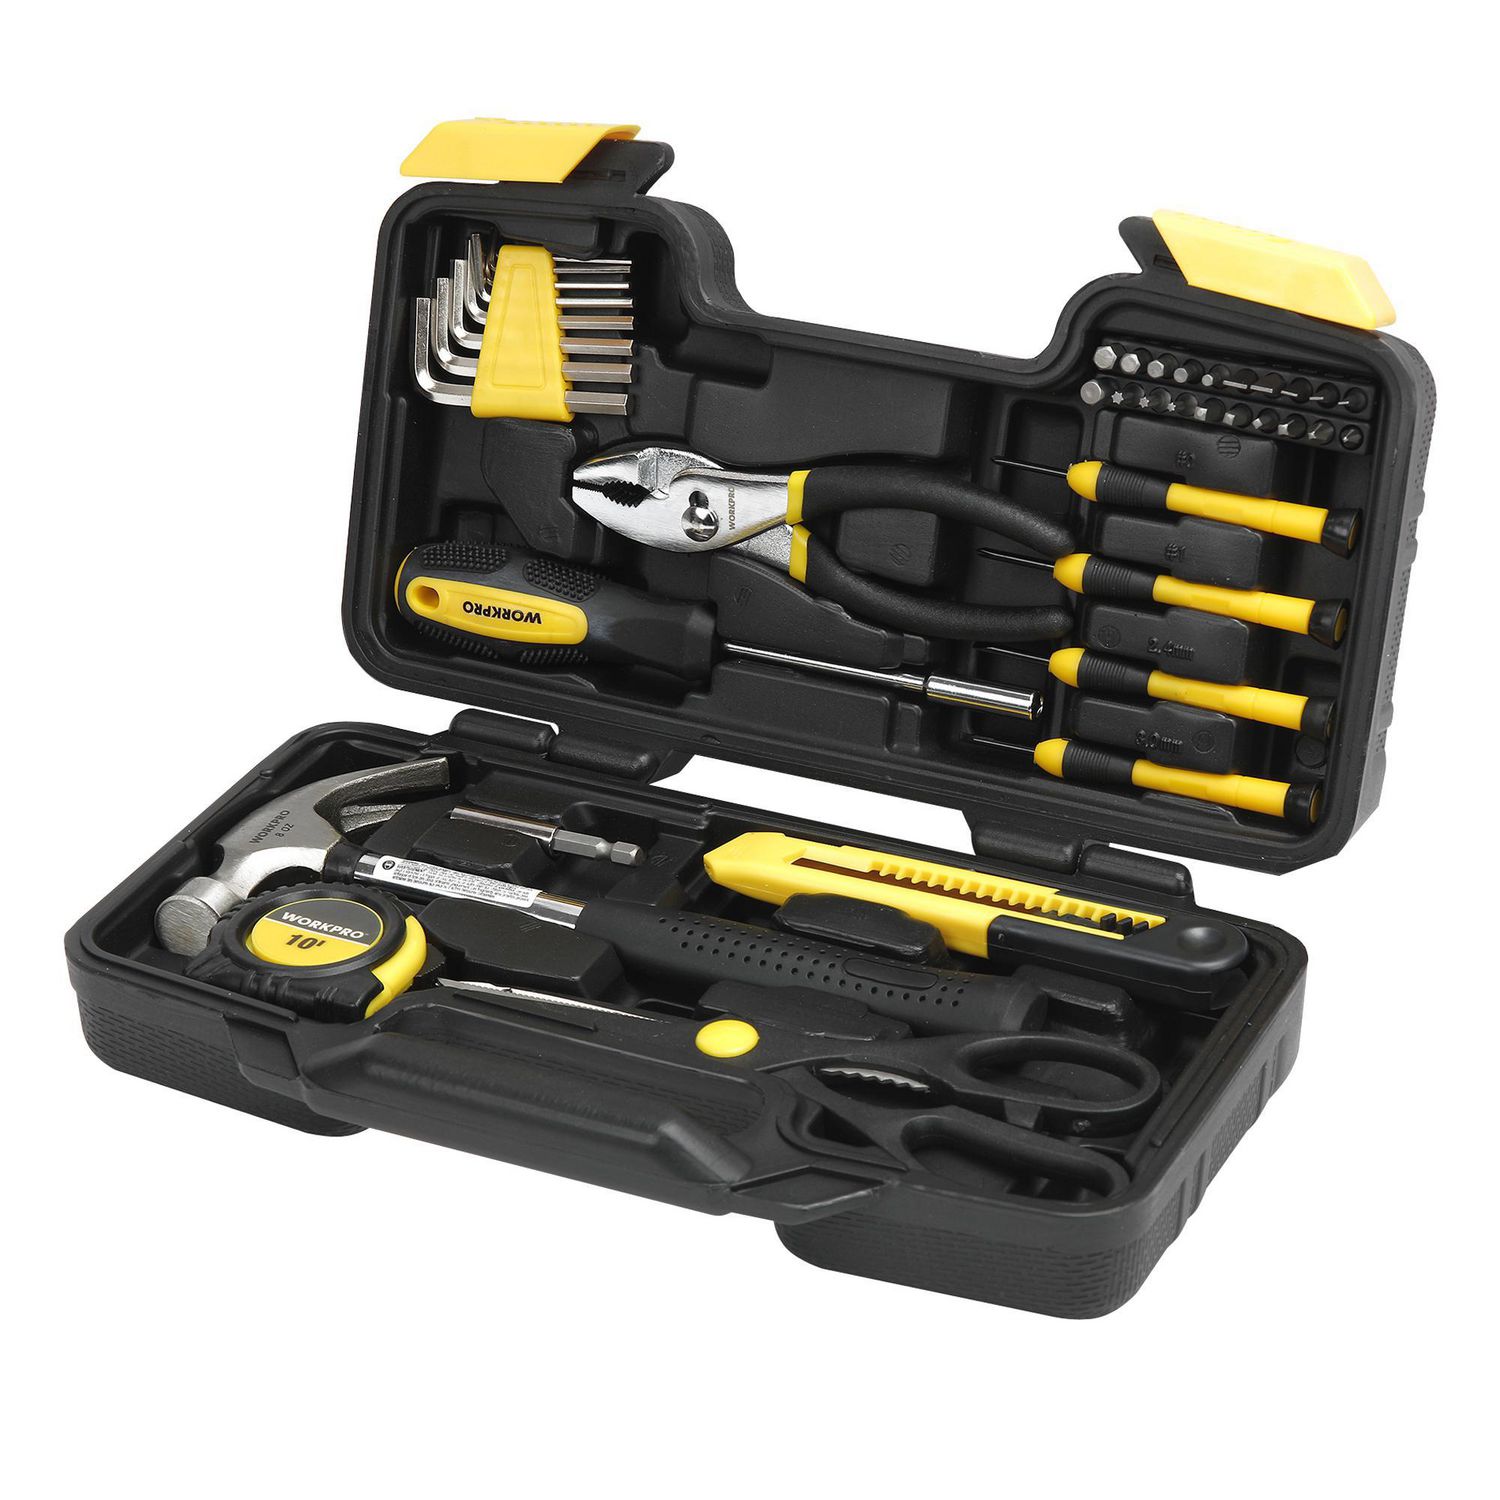 WorkPro Household Tool Kit-40 Piece